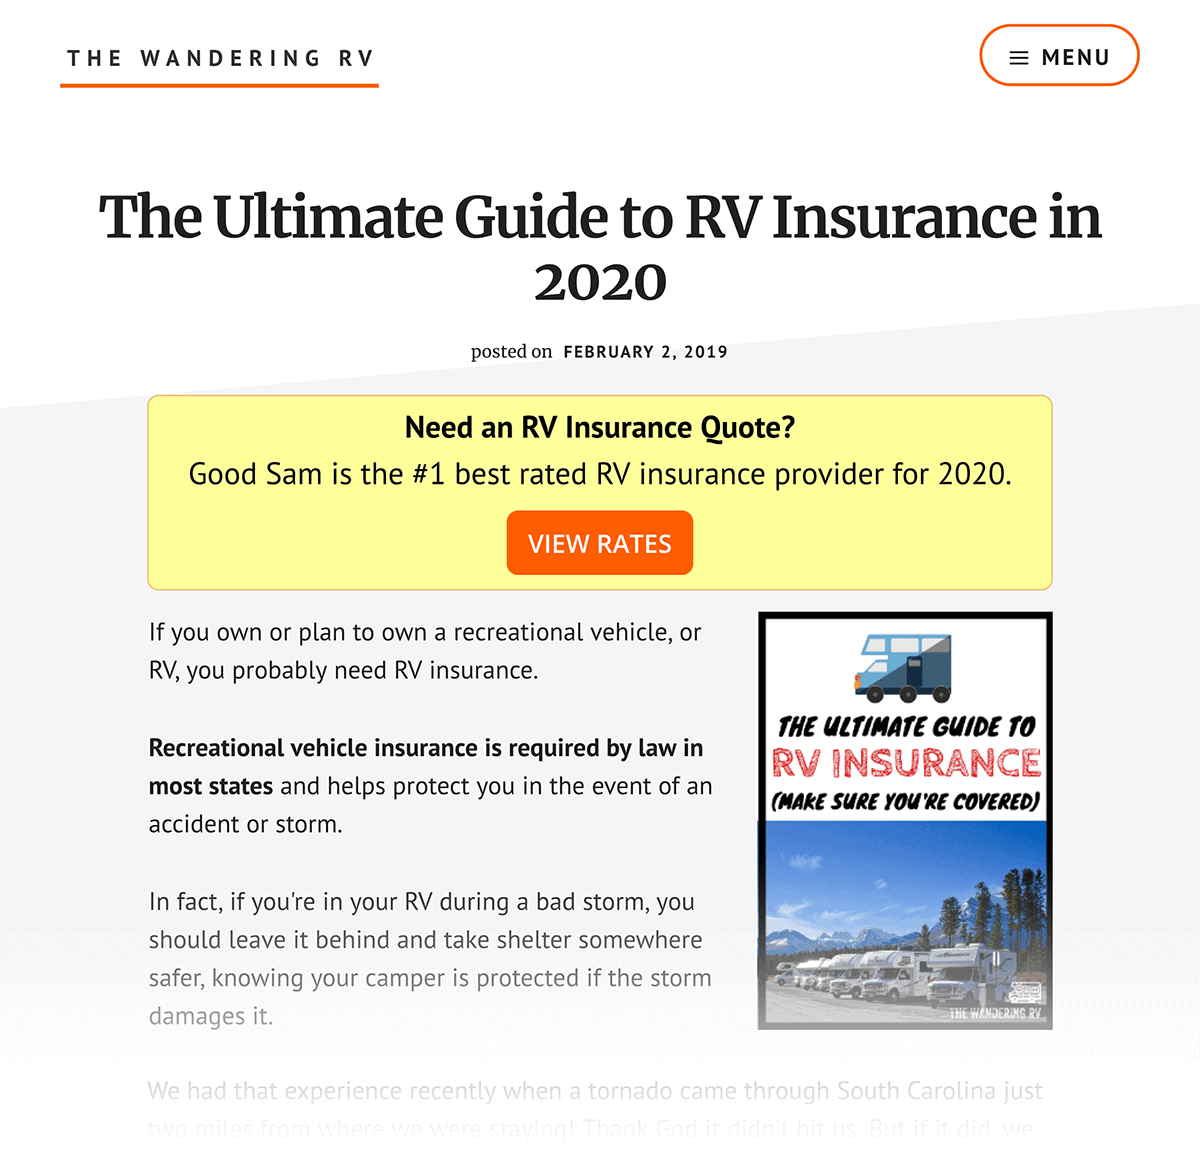 The Wandering RV – Insurance guide